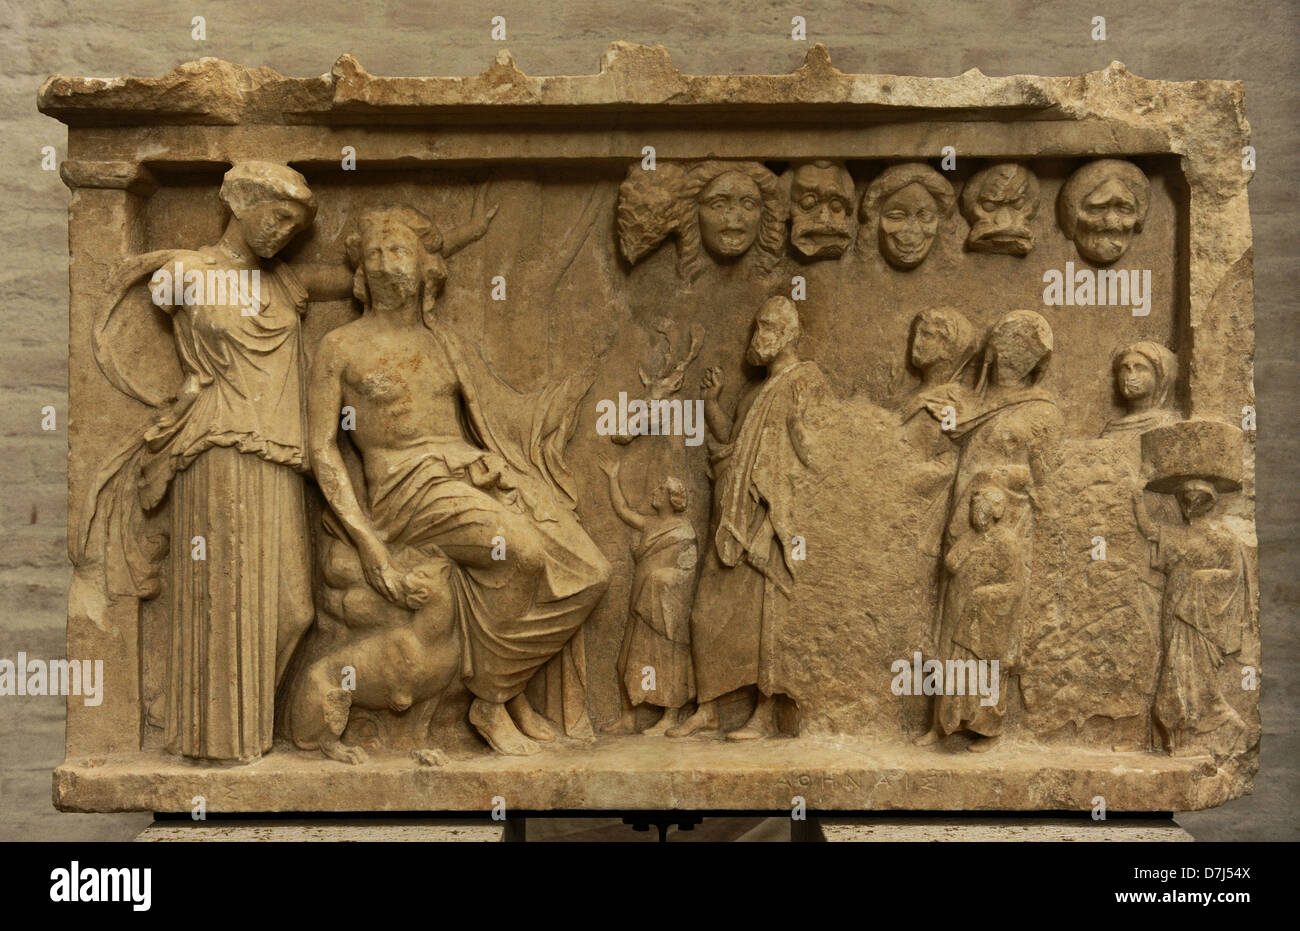 Votive stele depicting a sacrificial procession to Dionysus and Artemis for the win in a contest of theater. Votive offering. Stock Photo